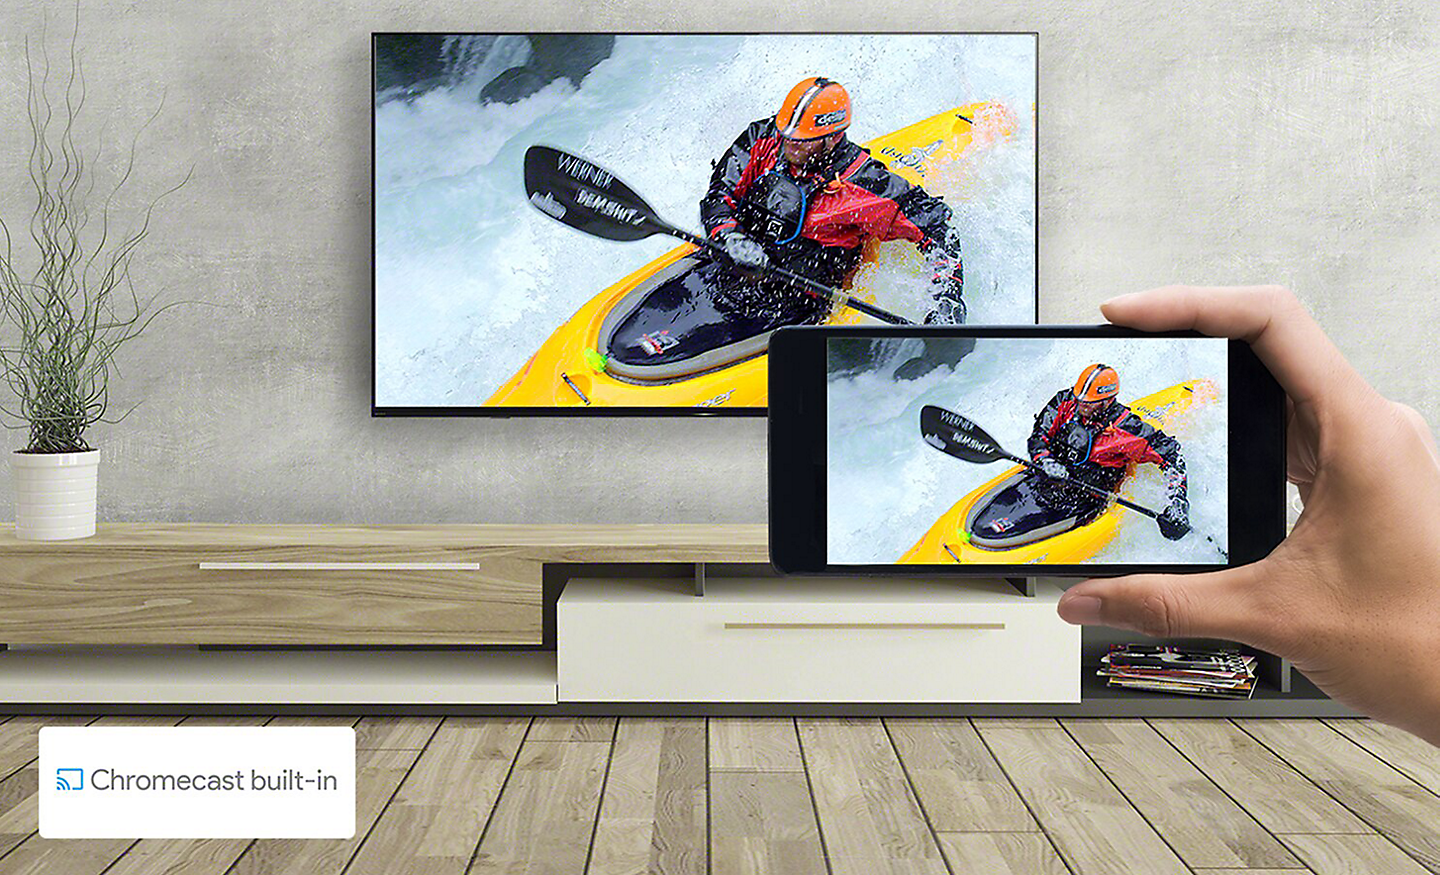 A living room showing a TV with a hand holding a smartphone with both screens displaying the same kayaking image, and Chromecast built-in logo bottom right